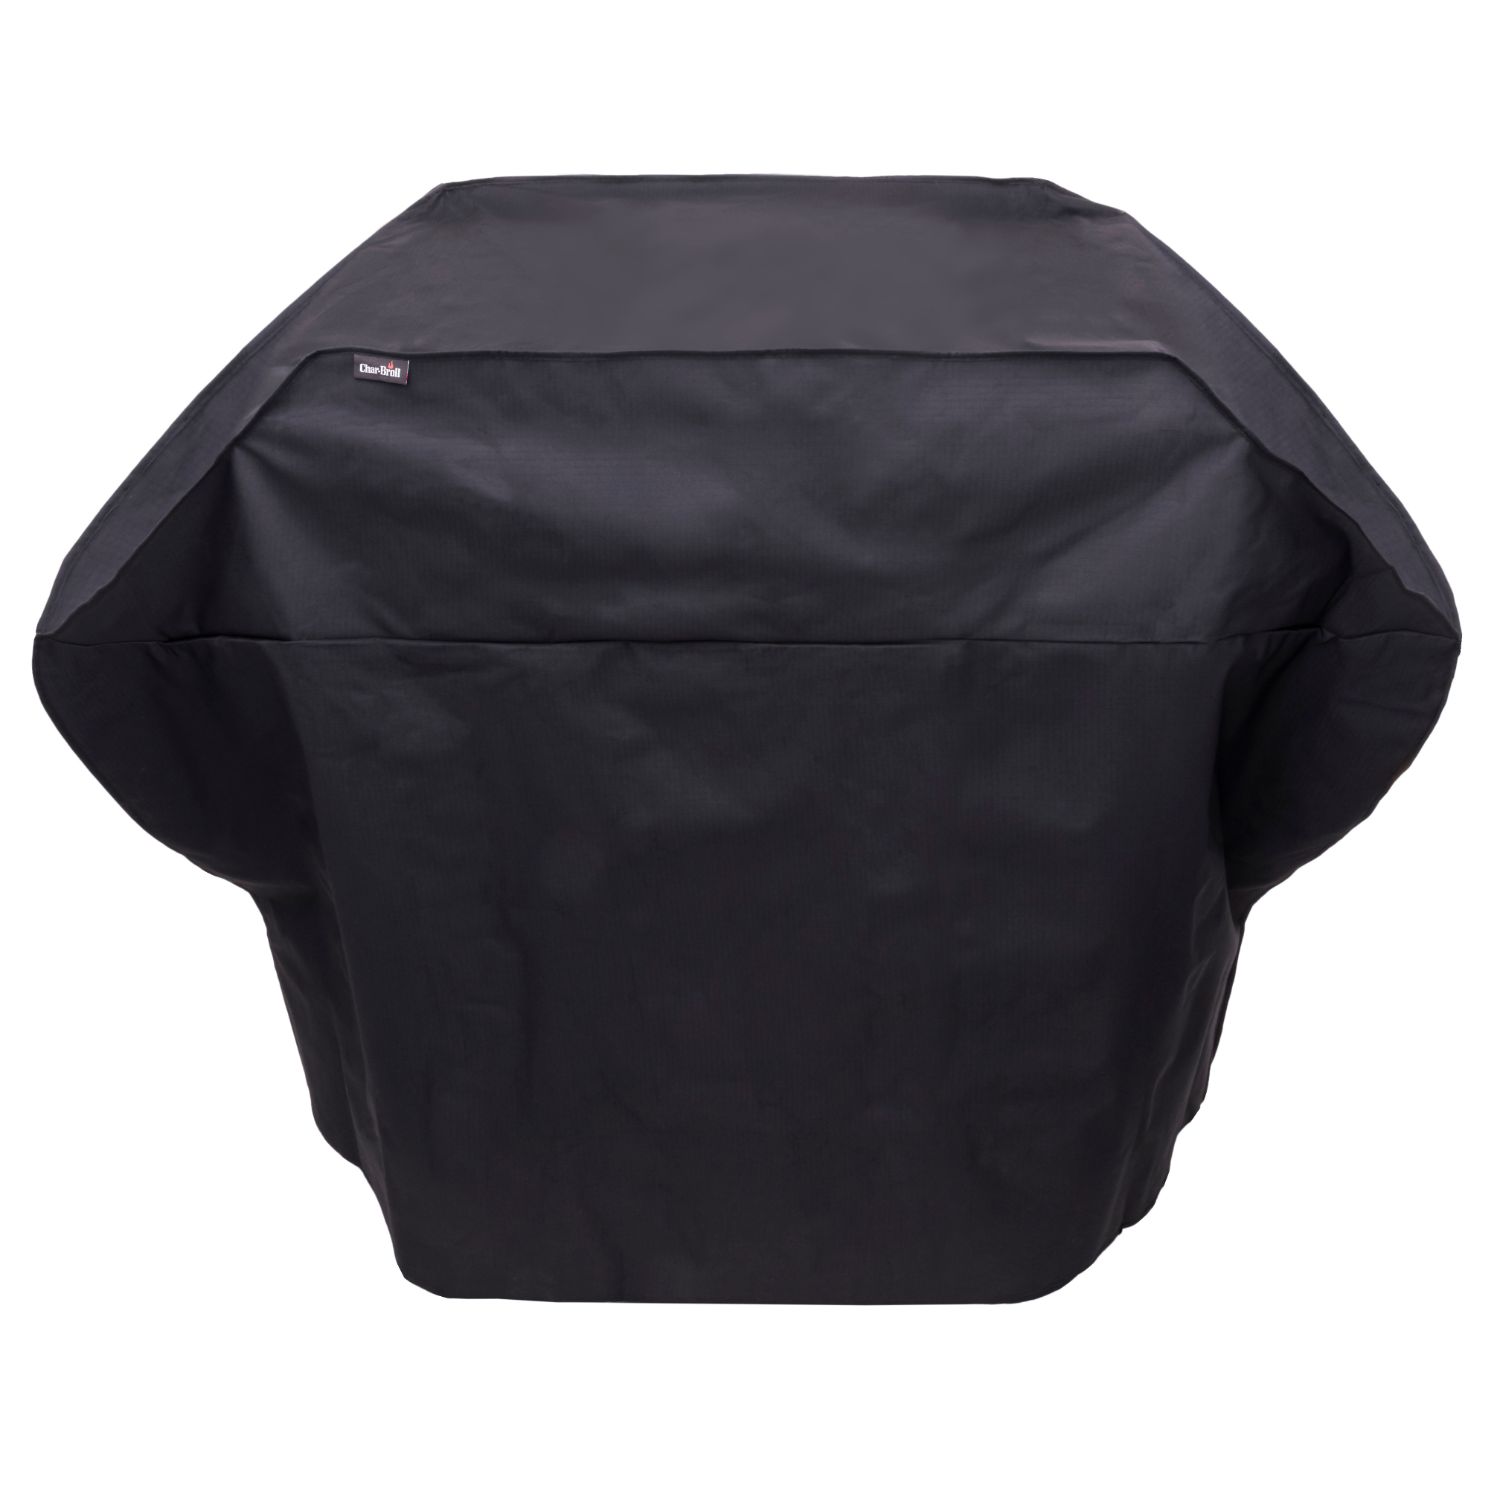 Char-Broil Large 3-4 Burner Rip-Stop Grill Cover